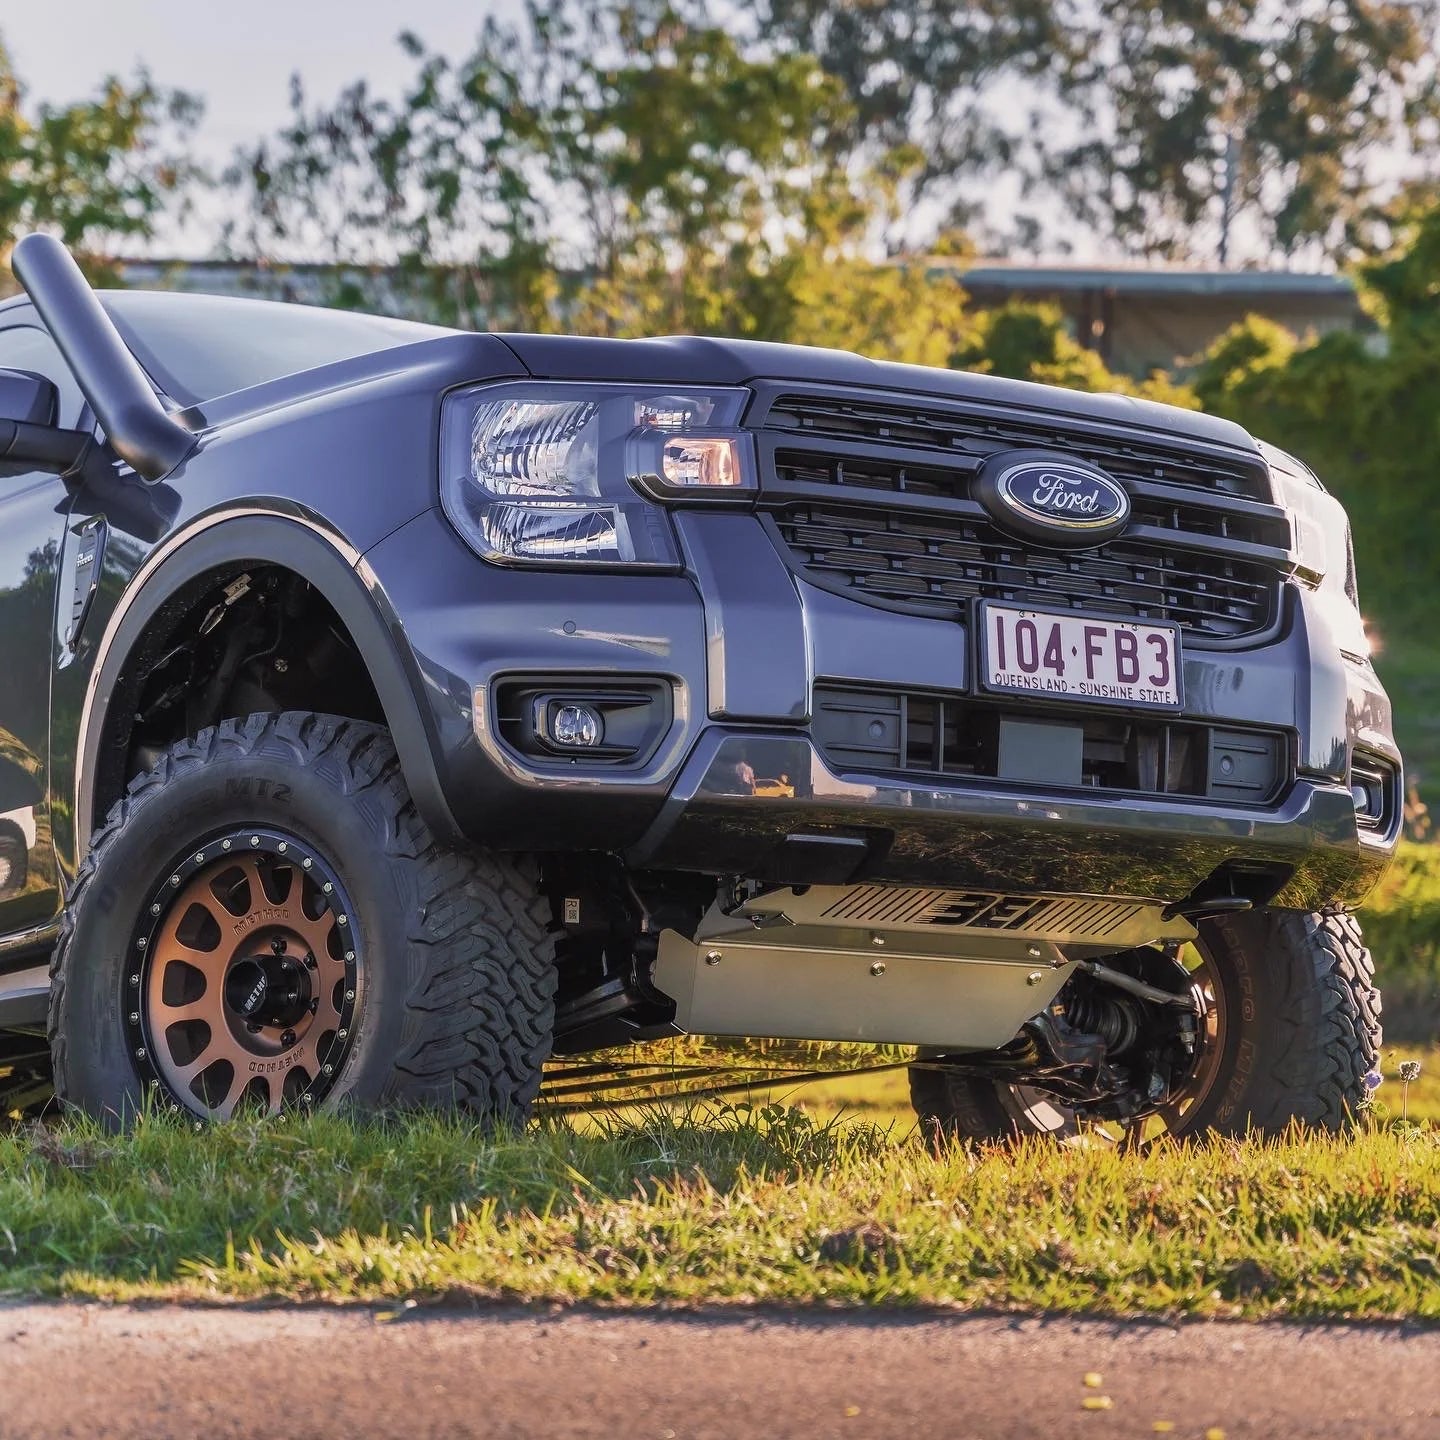 BEIHOUSE FORD RANGER NEXT GEN UNDERBODY PROTECTION